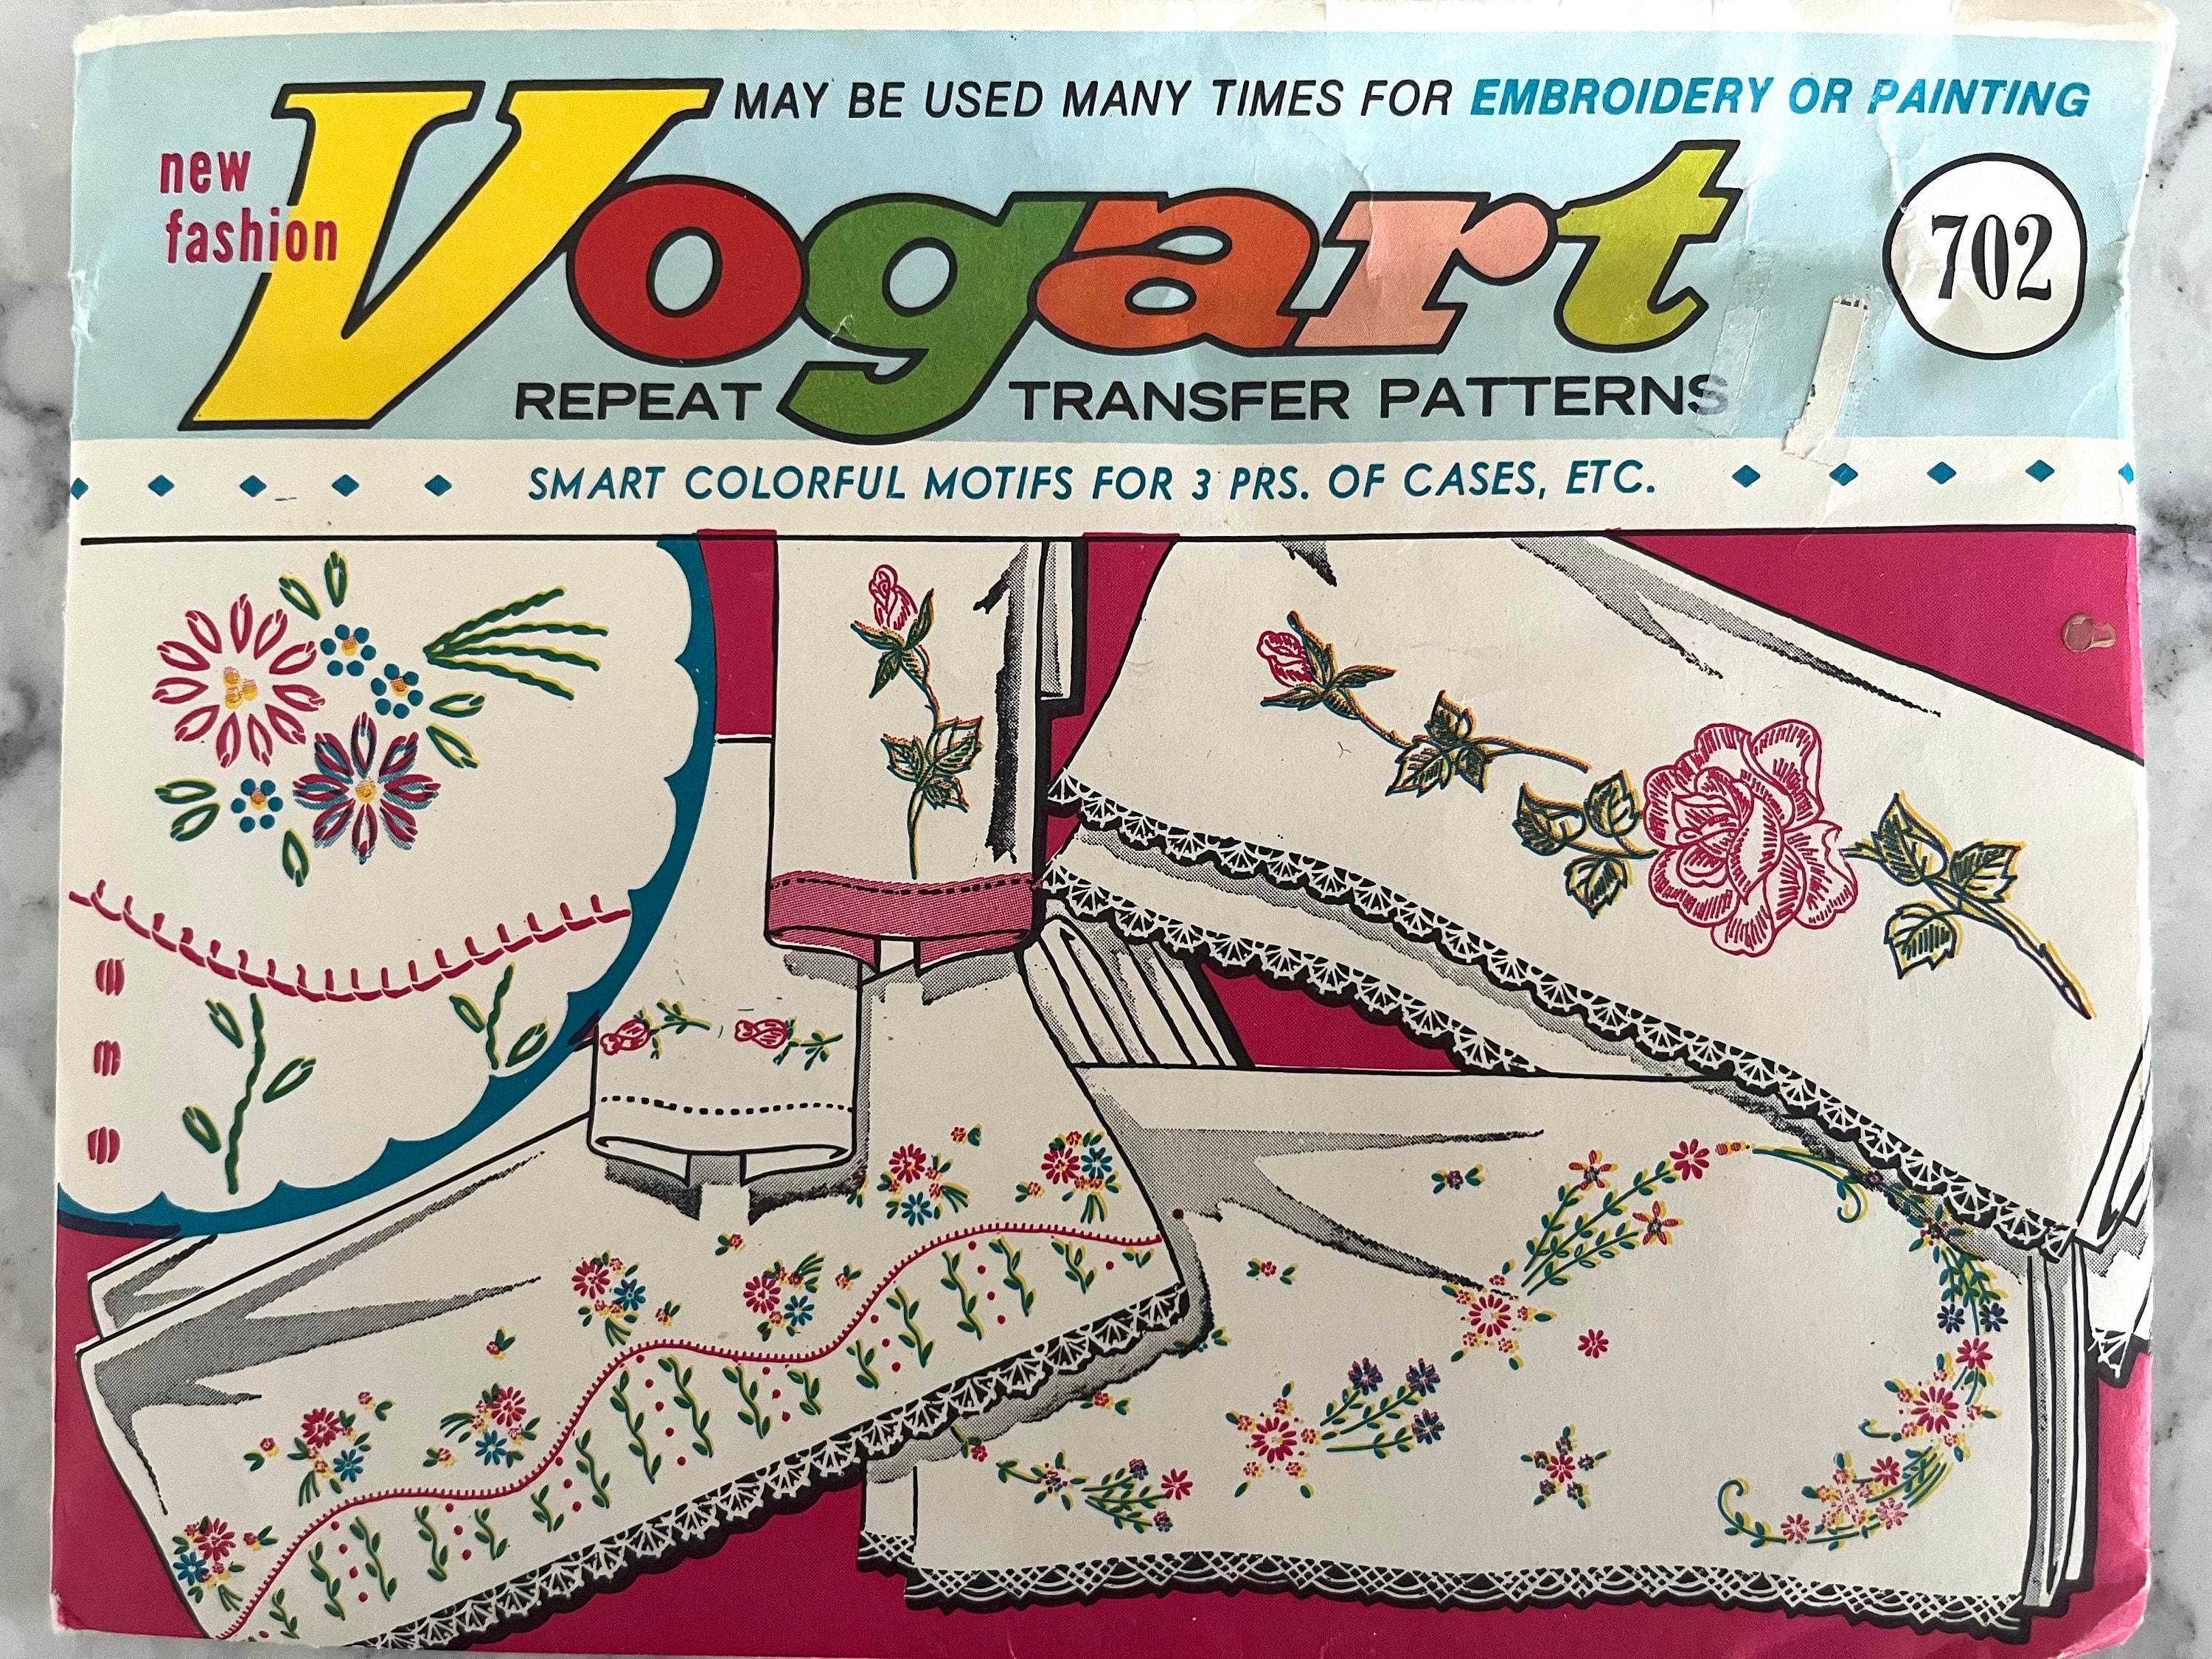 vintage Vogart hot iron on transfers, pillowcases to embroider